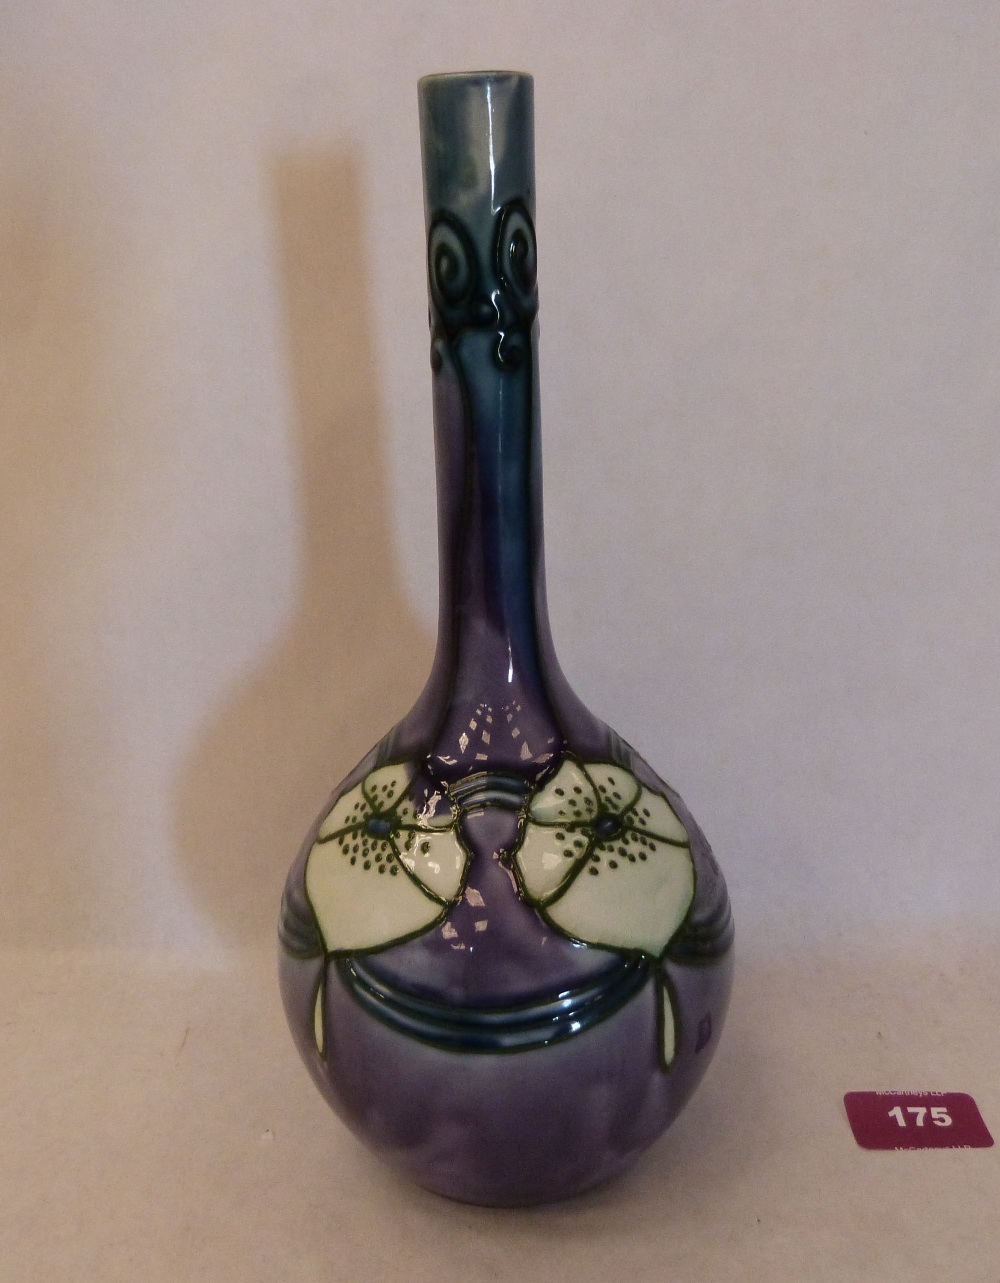 A Minton Secessionist vase, number 29, tube-line decorated with white on a purple ground. Factory